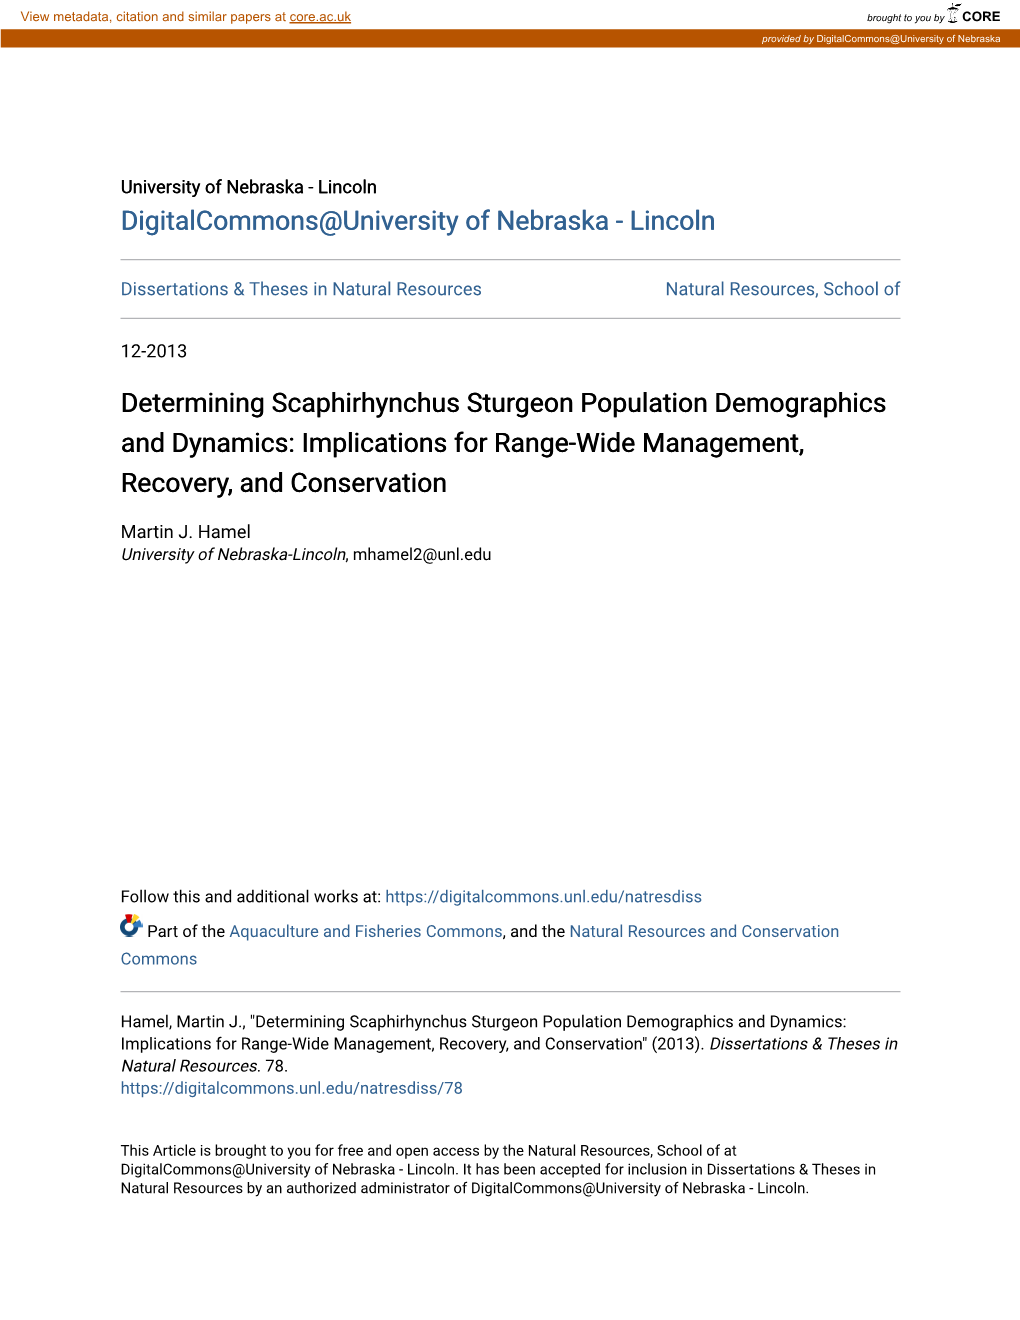 Determining Scaphirhynchus Sturgeon Population Demographics and Dynamics: Implications for Range-Wide Management, Recovery, and Conservation